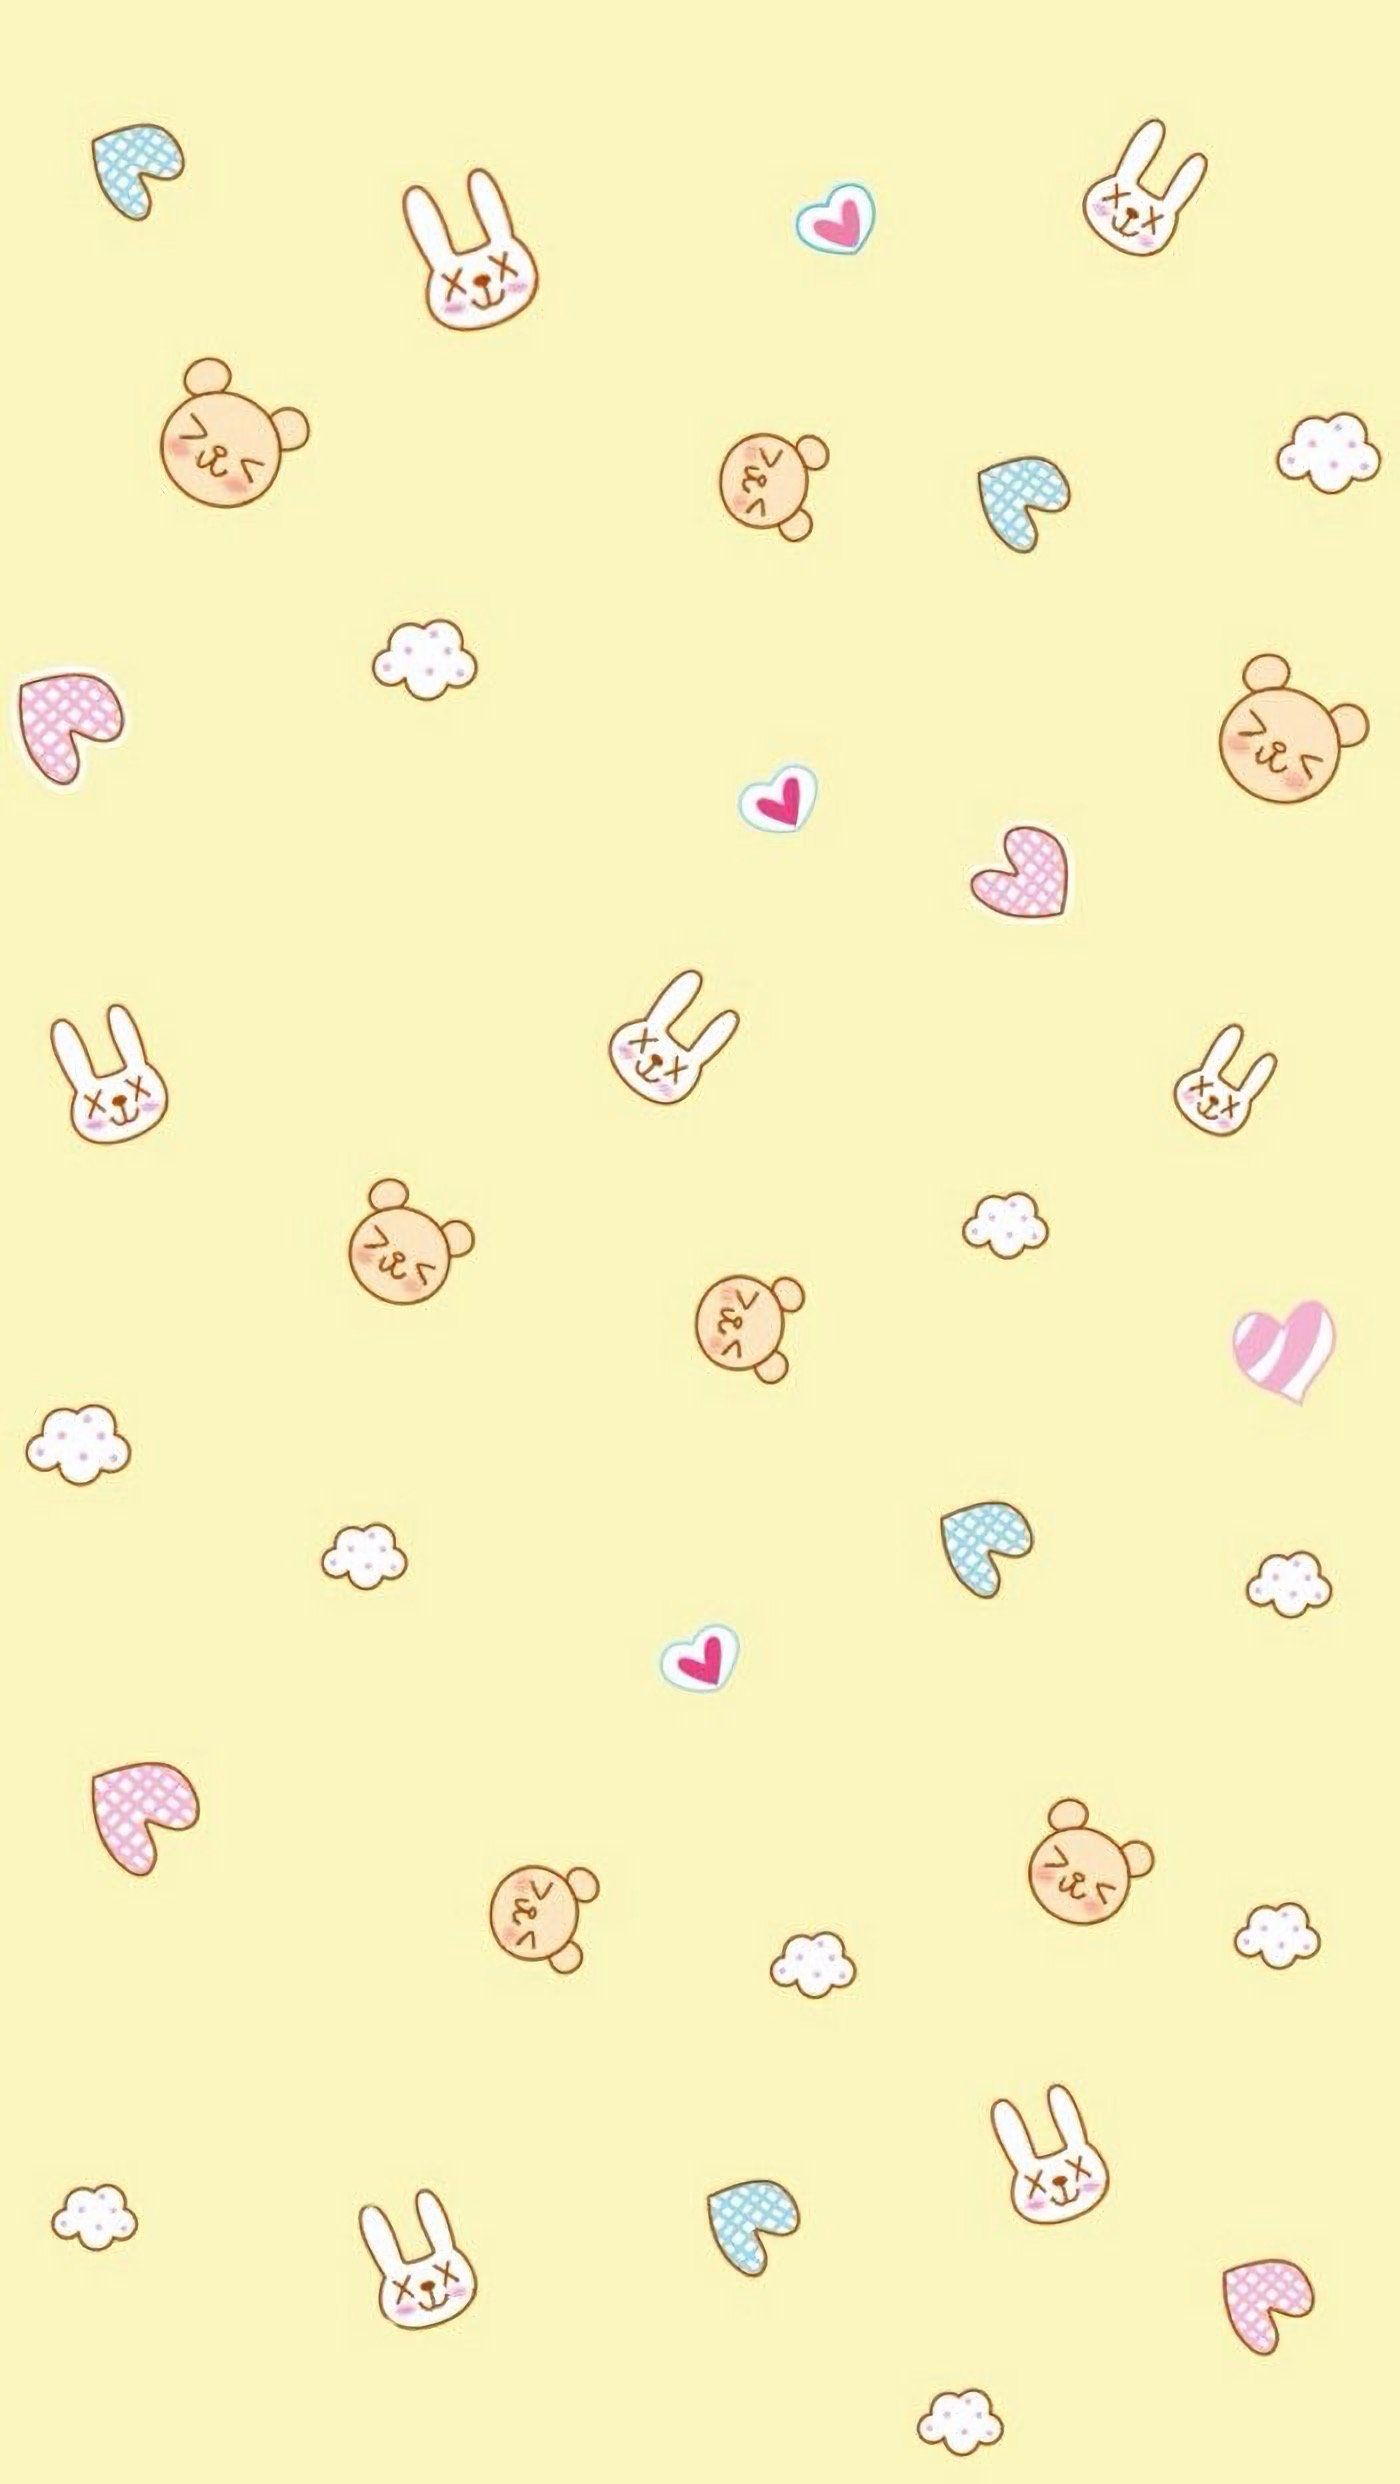 Wallpaper for phone, yellow background, with drawings of teddy bears, hearts and rabbits, in pastel colors - Cute iPhone